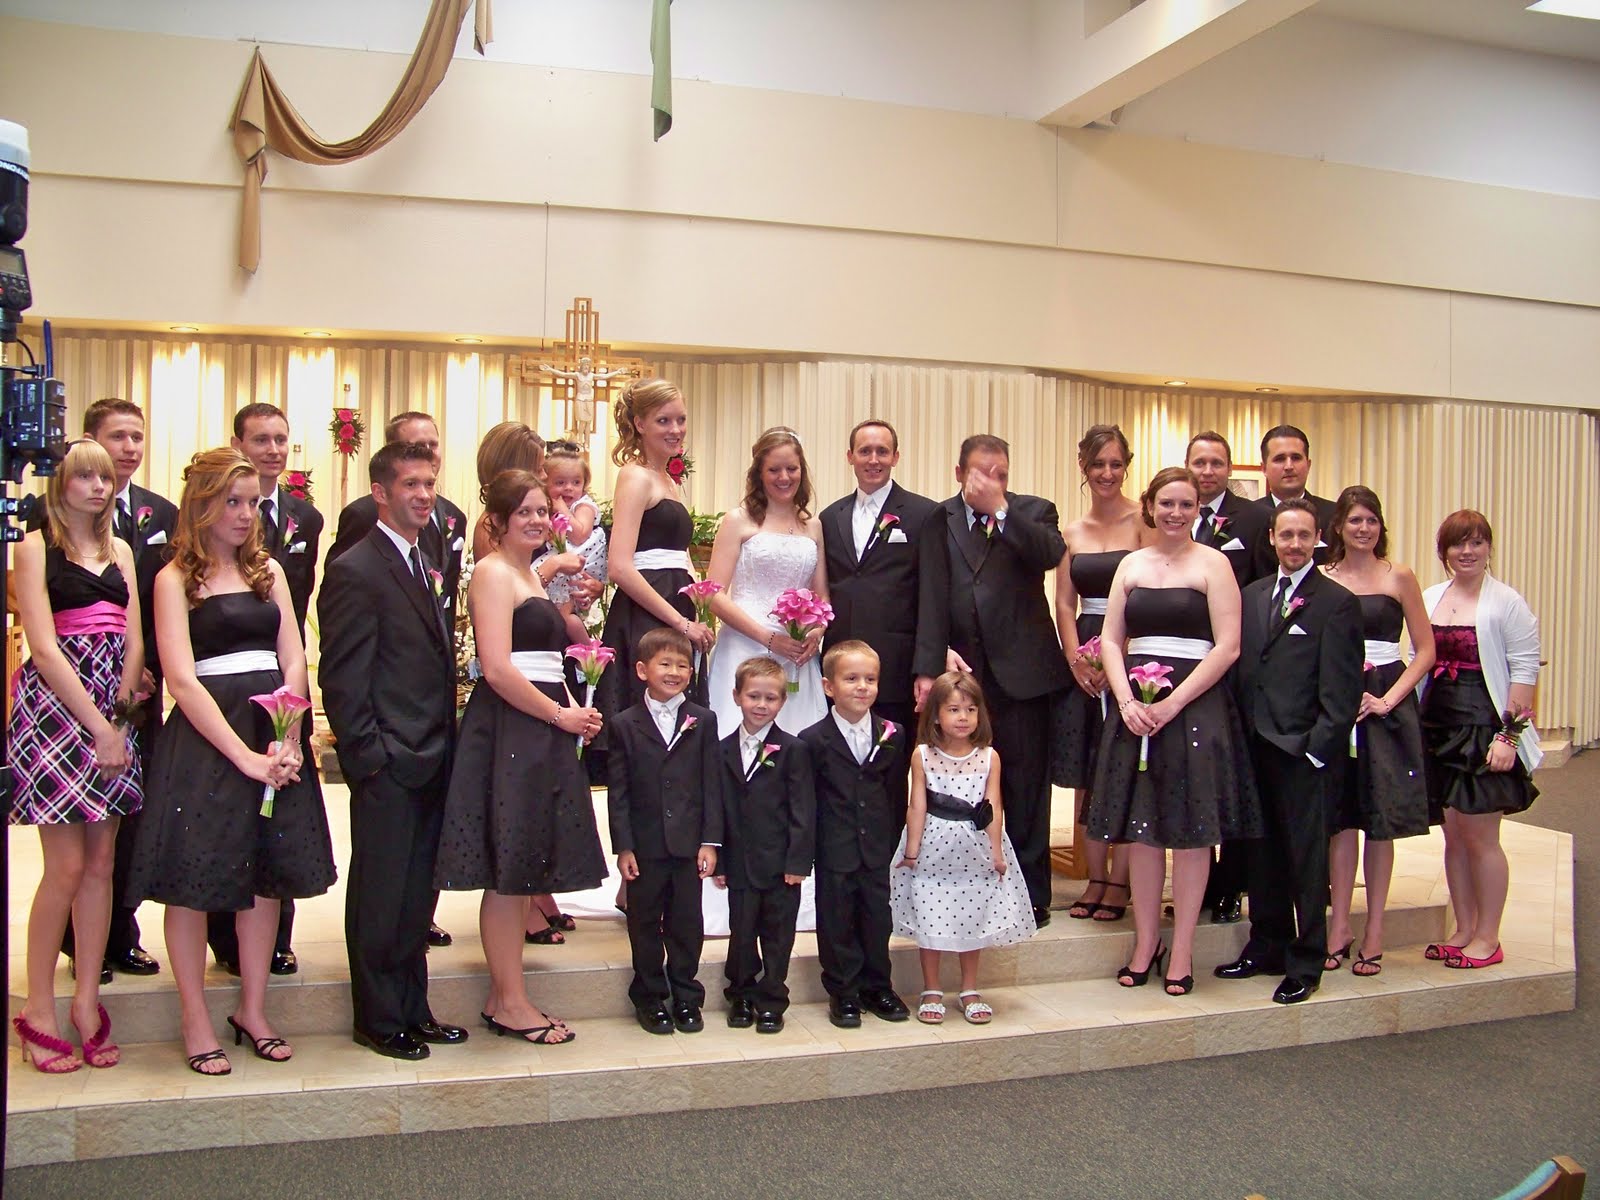 The entire bridal party